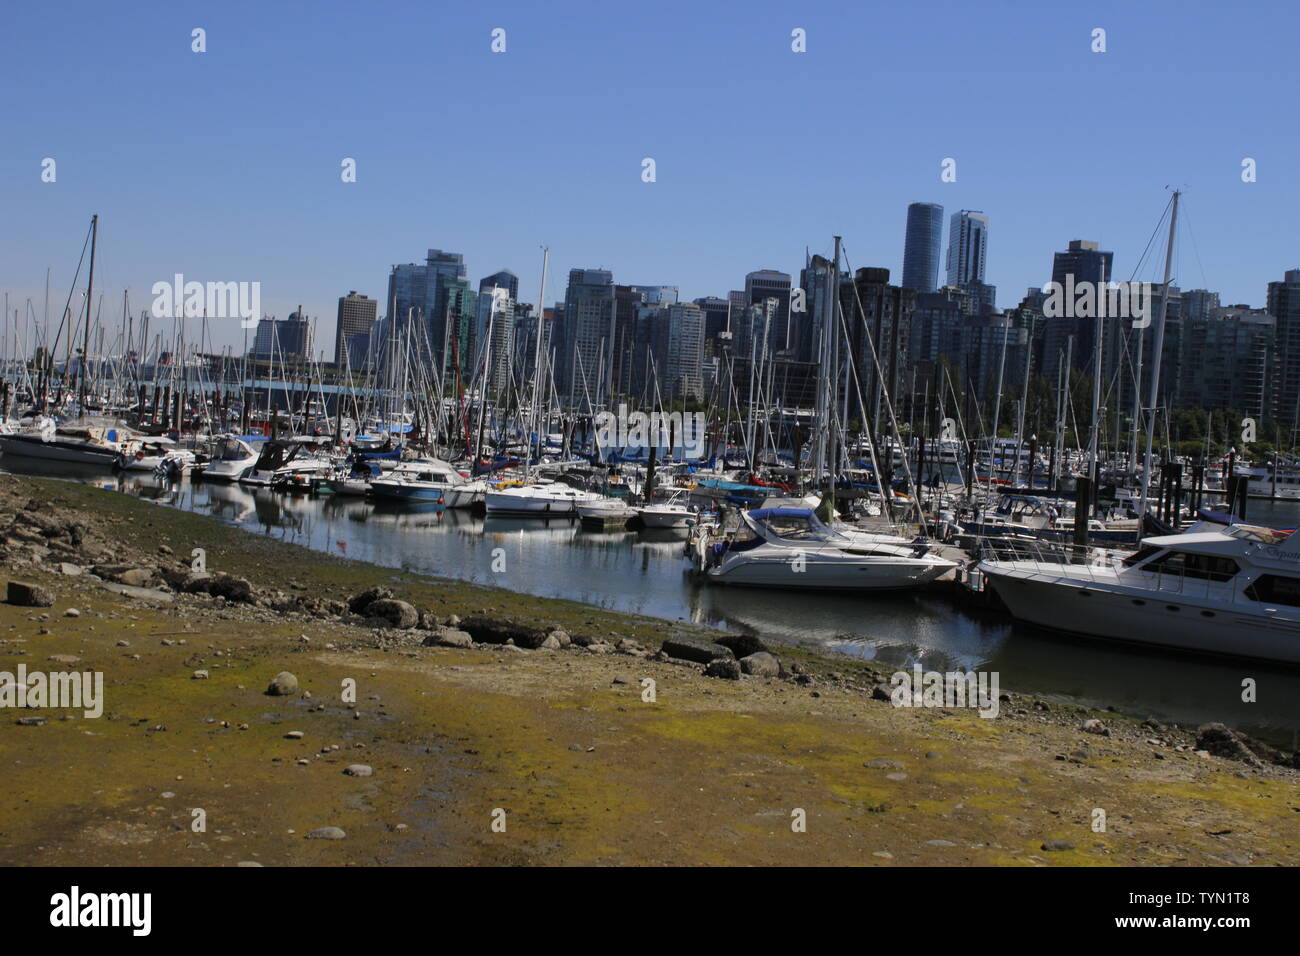 June 18 2018, Vancouver Canada: Editorial image of False creek boat harbour. This is a very rich area of Vancouver. Stock Photo